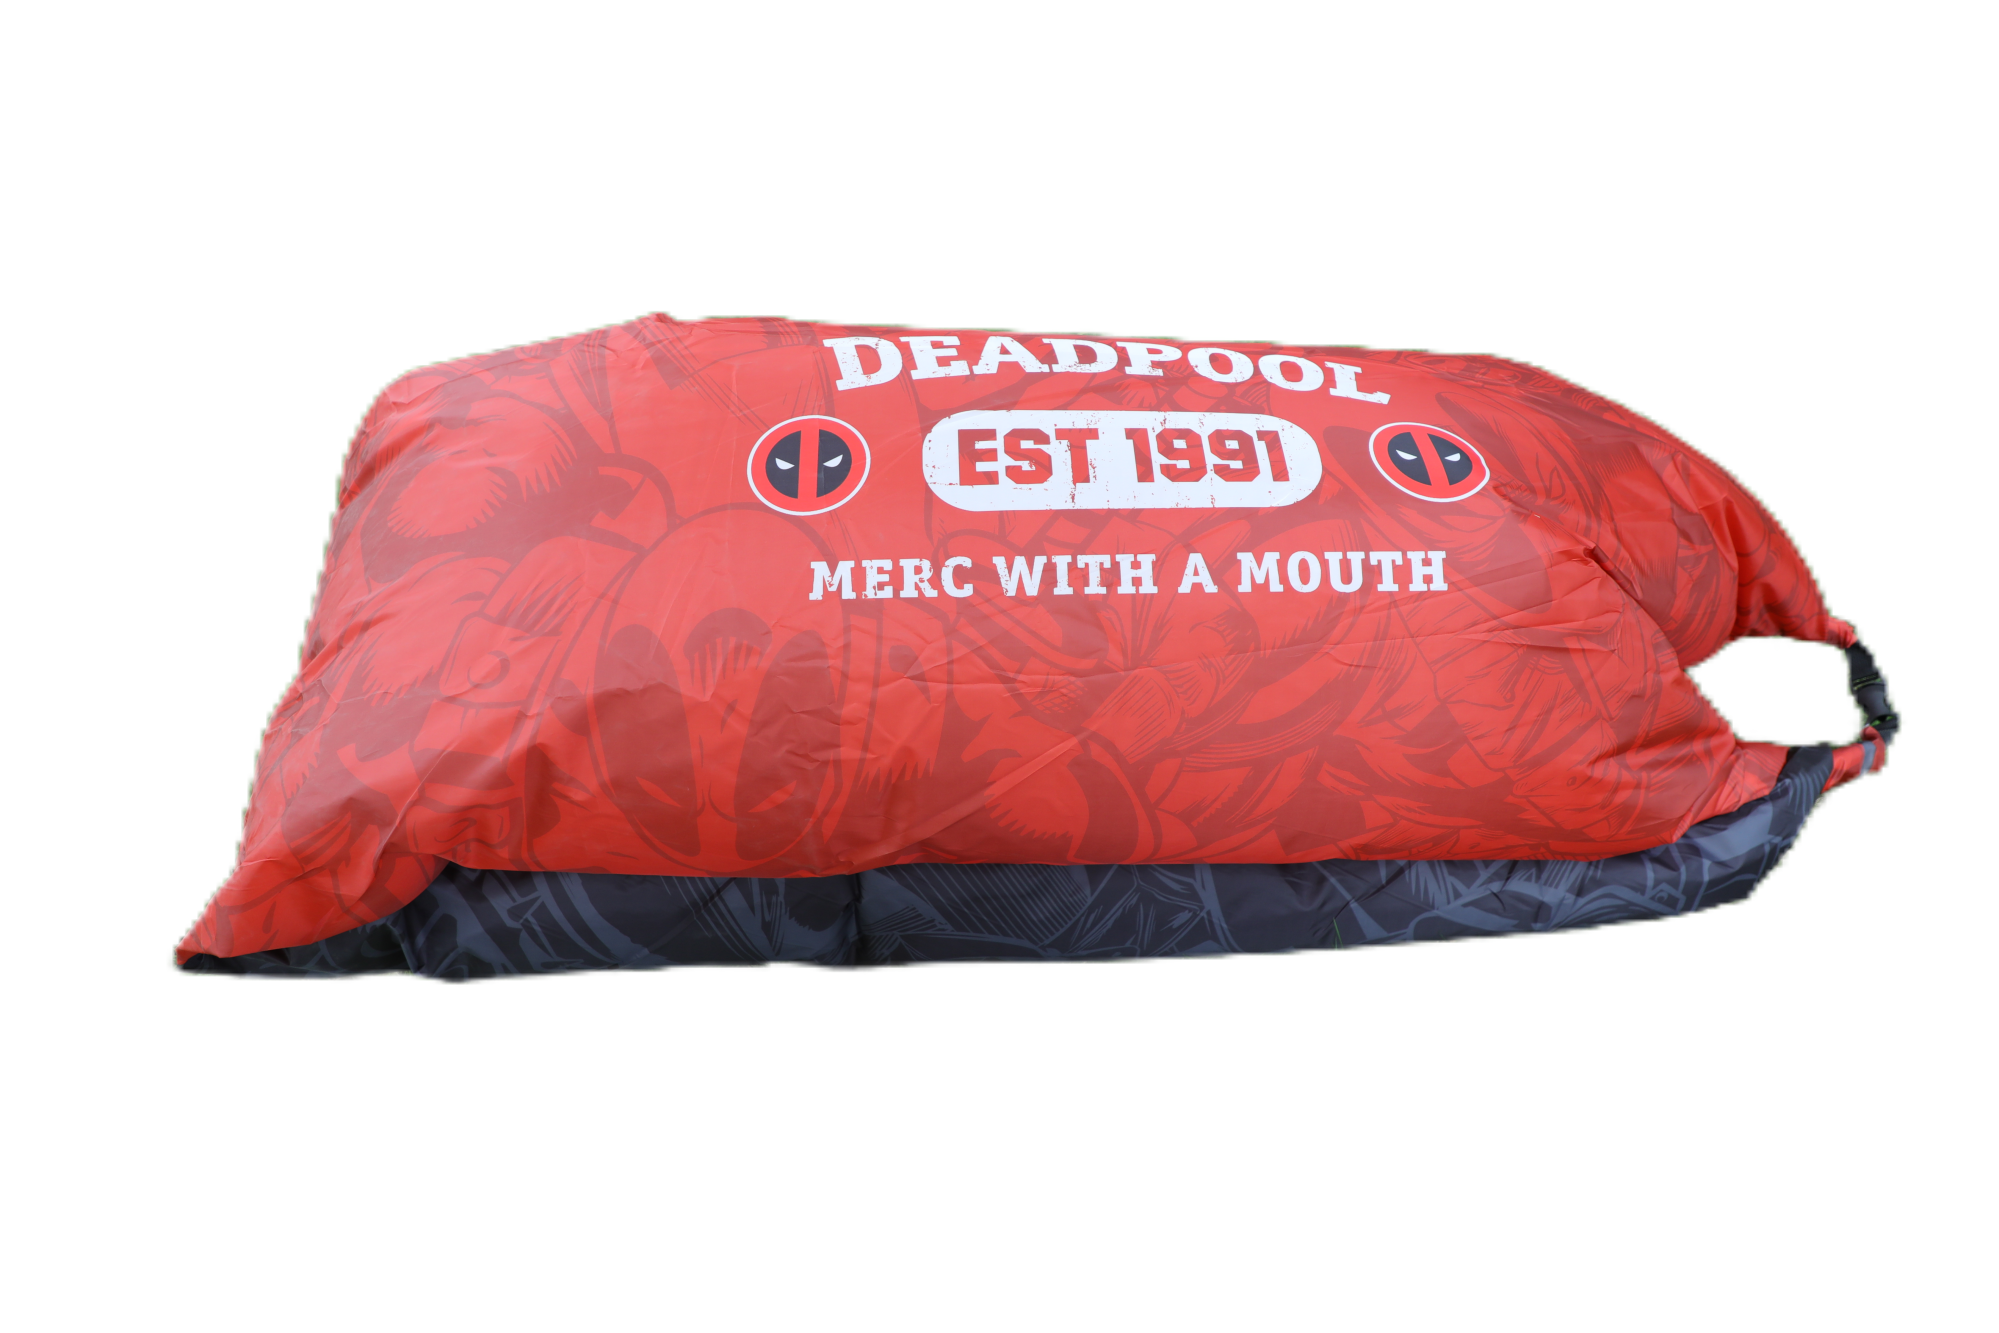 Marvel Deadpool Outdoor Inflatable Sofa Outdoor Camping VFH41410-DP